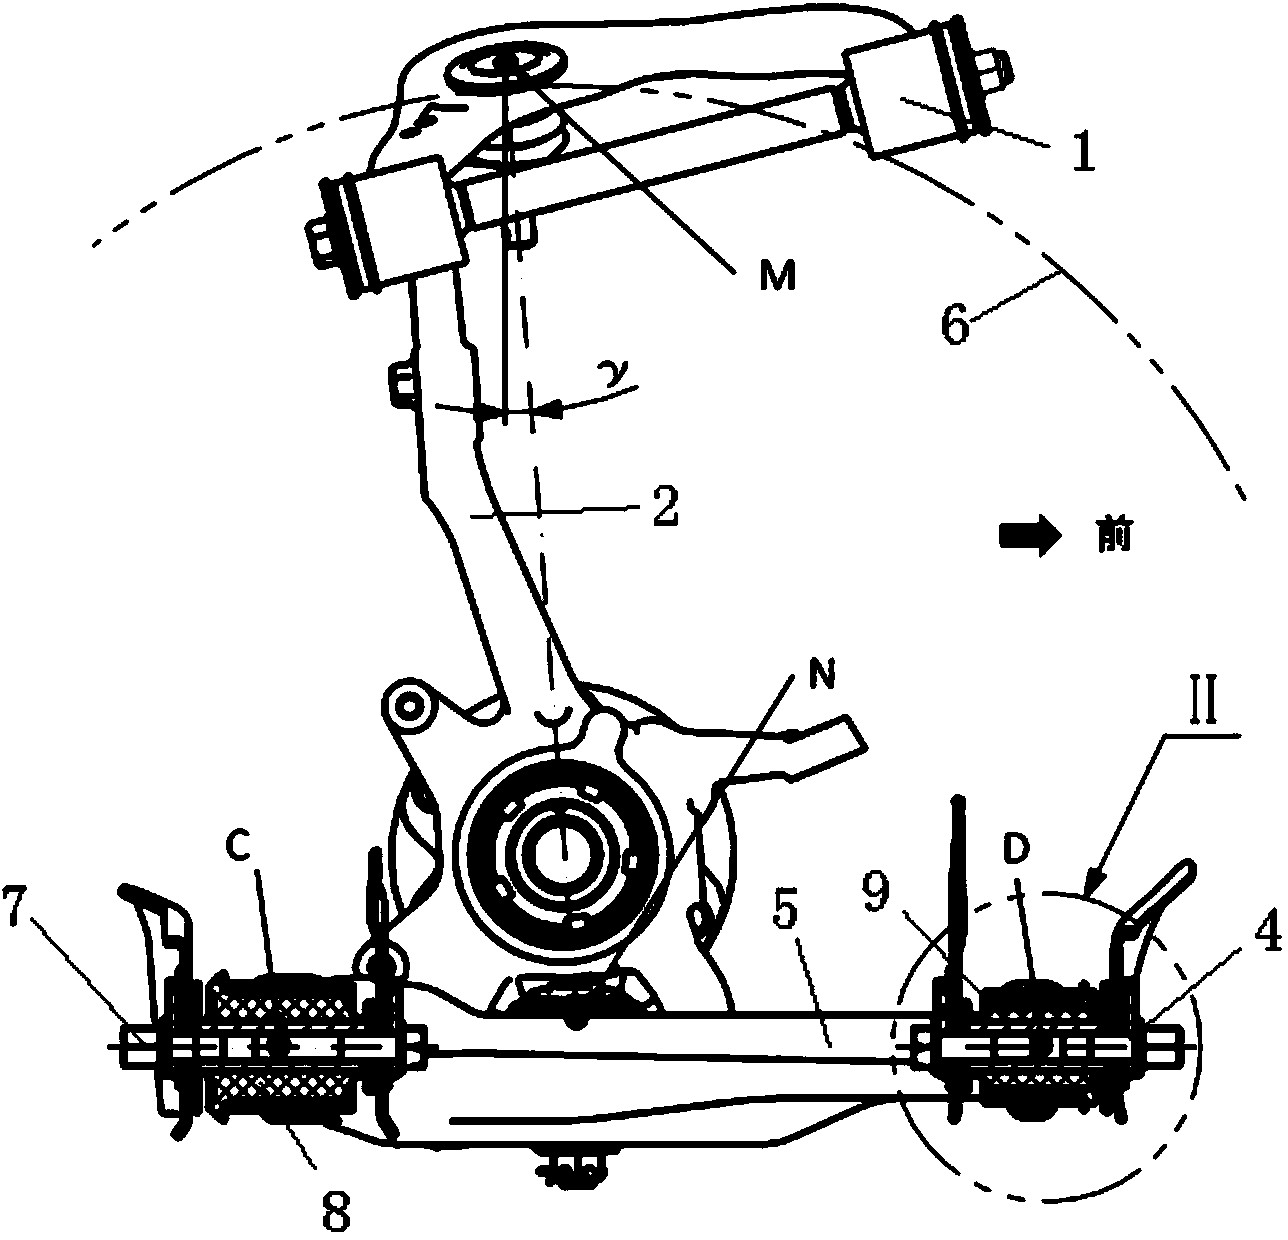 Method for calibrating camber angle and caster angle of wheel